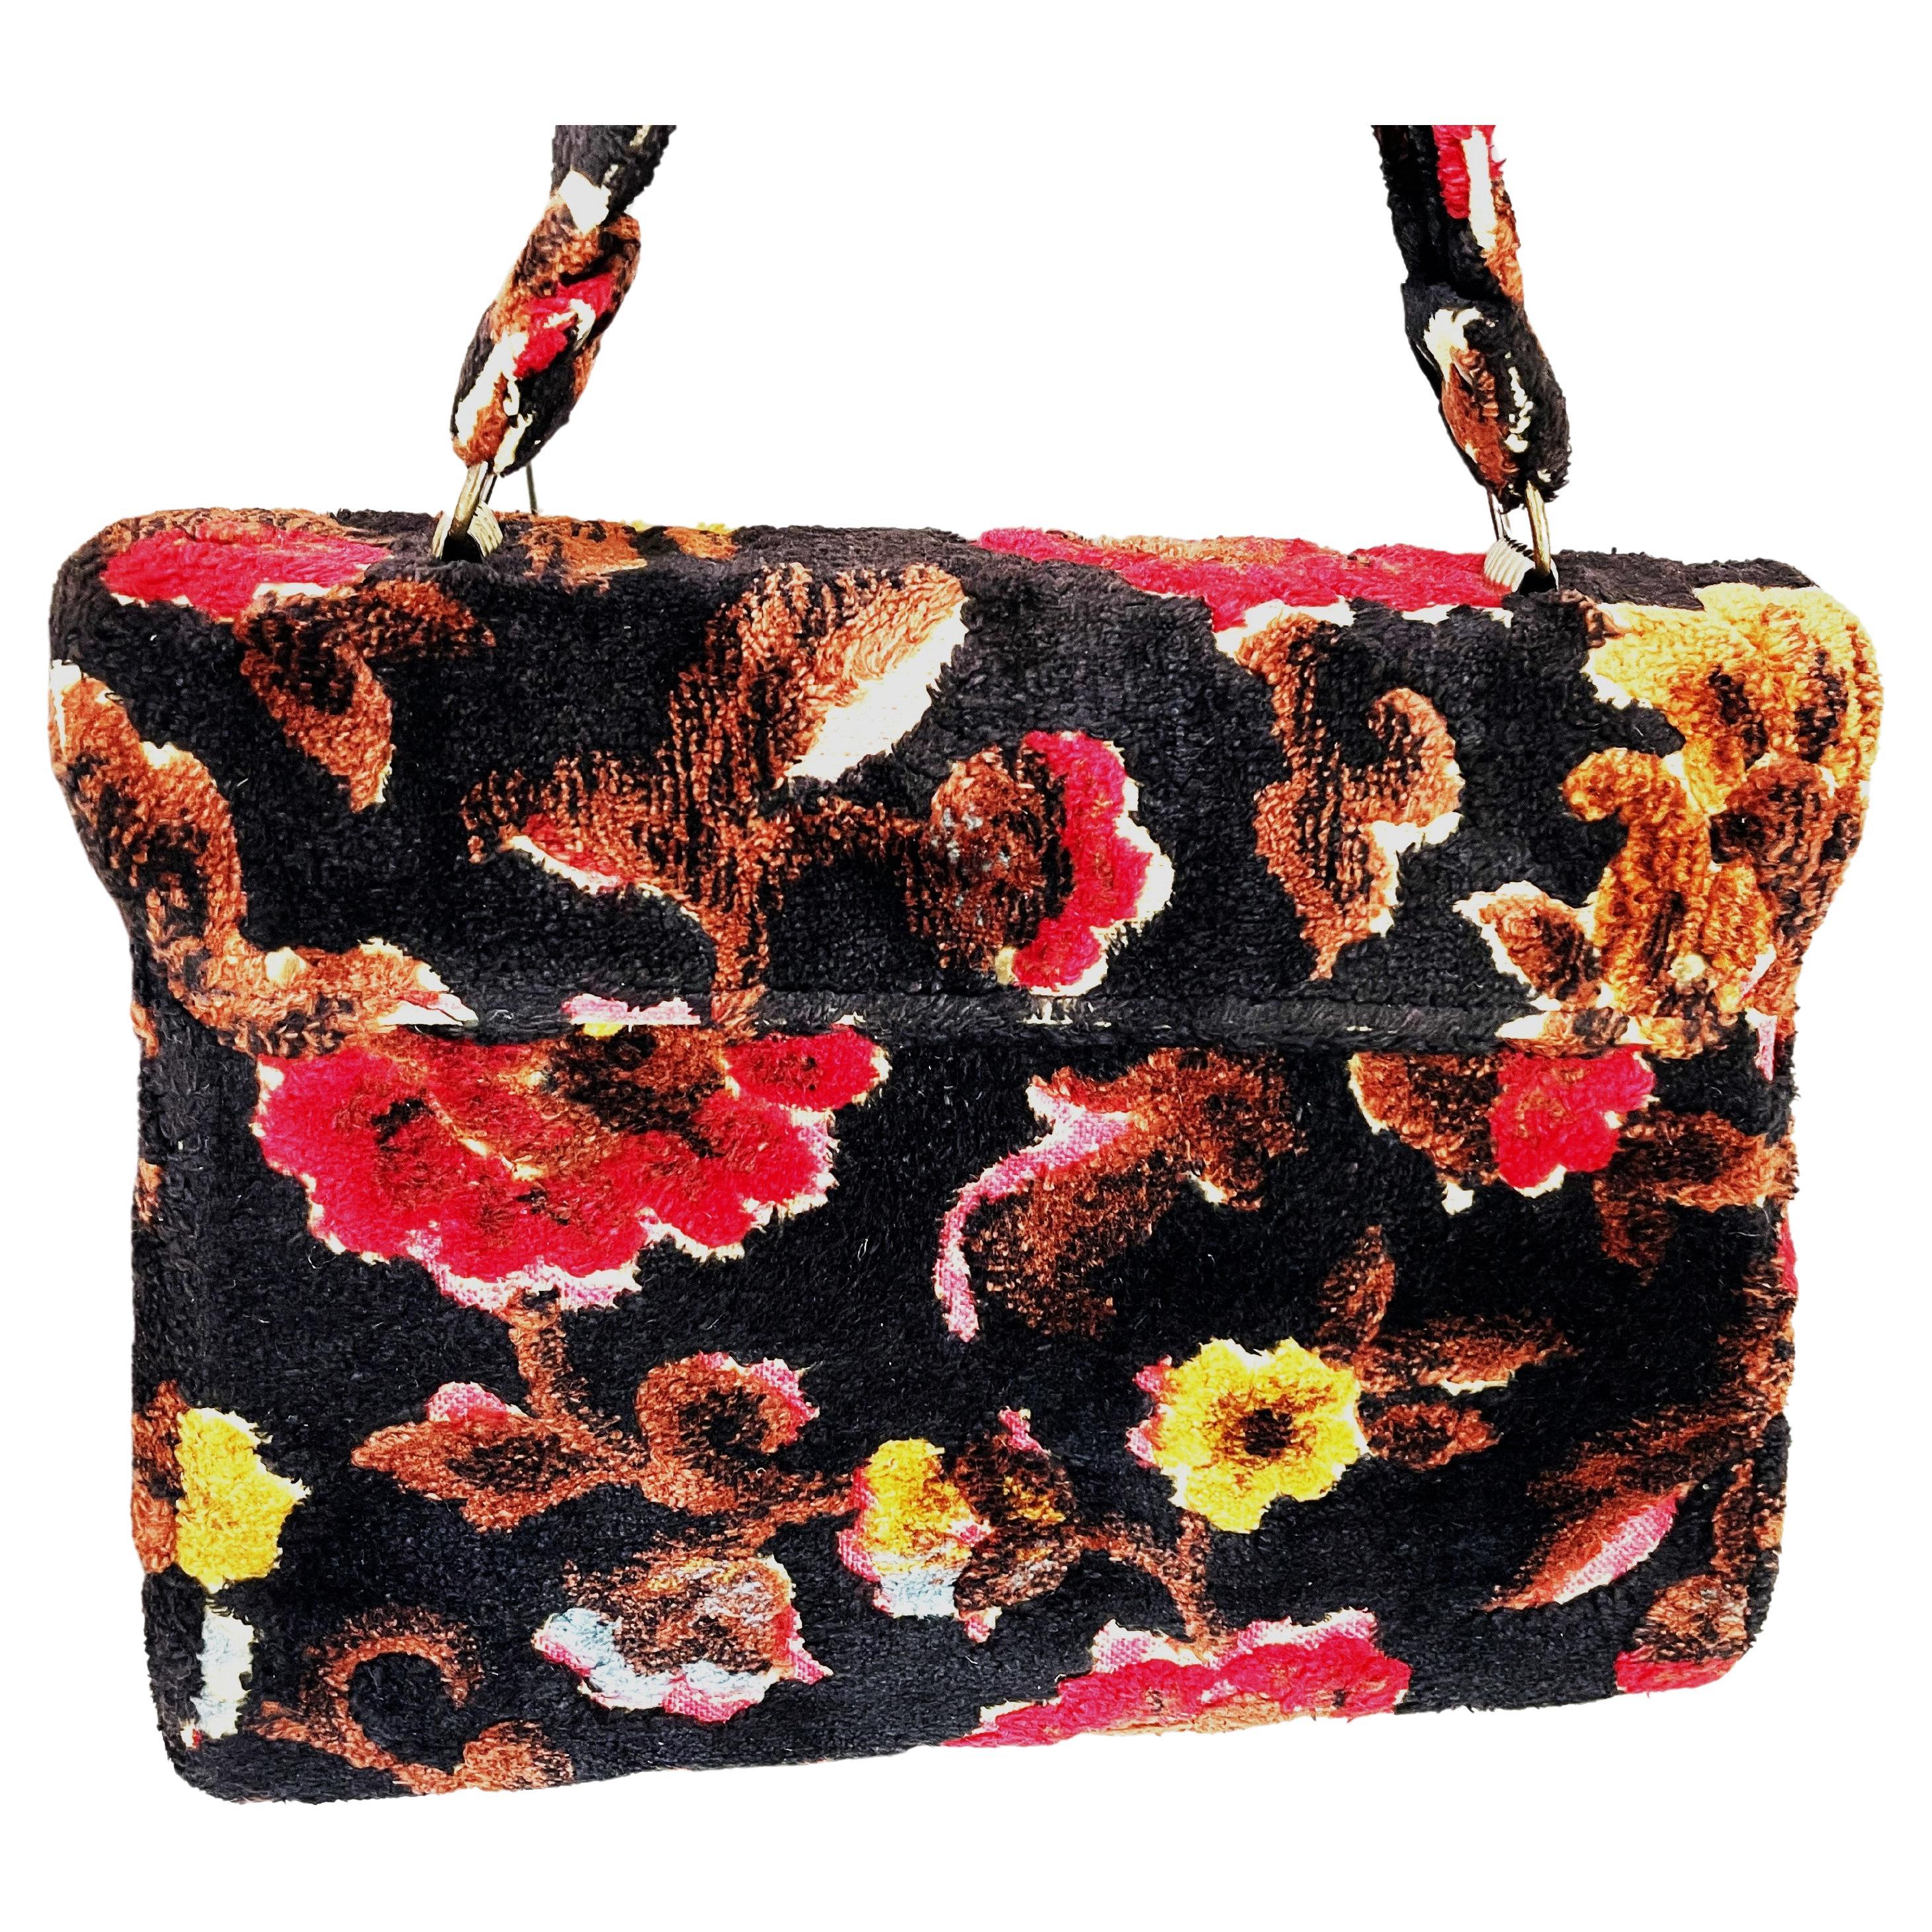 This timeless collectable from the 1950s is an oversized, eyecaticng statement piece that adds a hint of tastful clamur to any ensable. Suptous cut velvet - chenille fabric in mult-lined jewel tones over black gives this classic handbag a subtile,